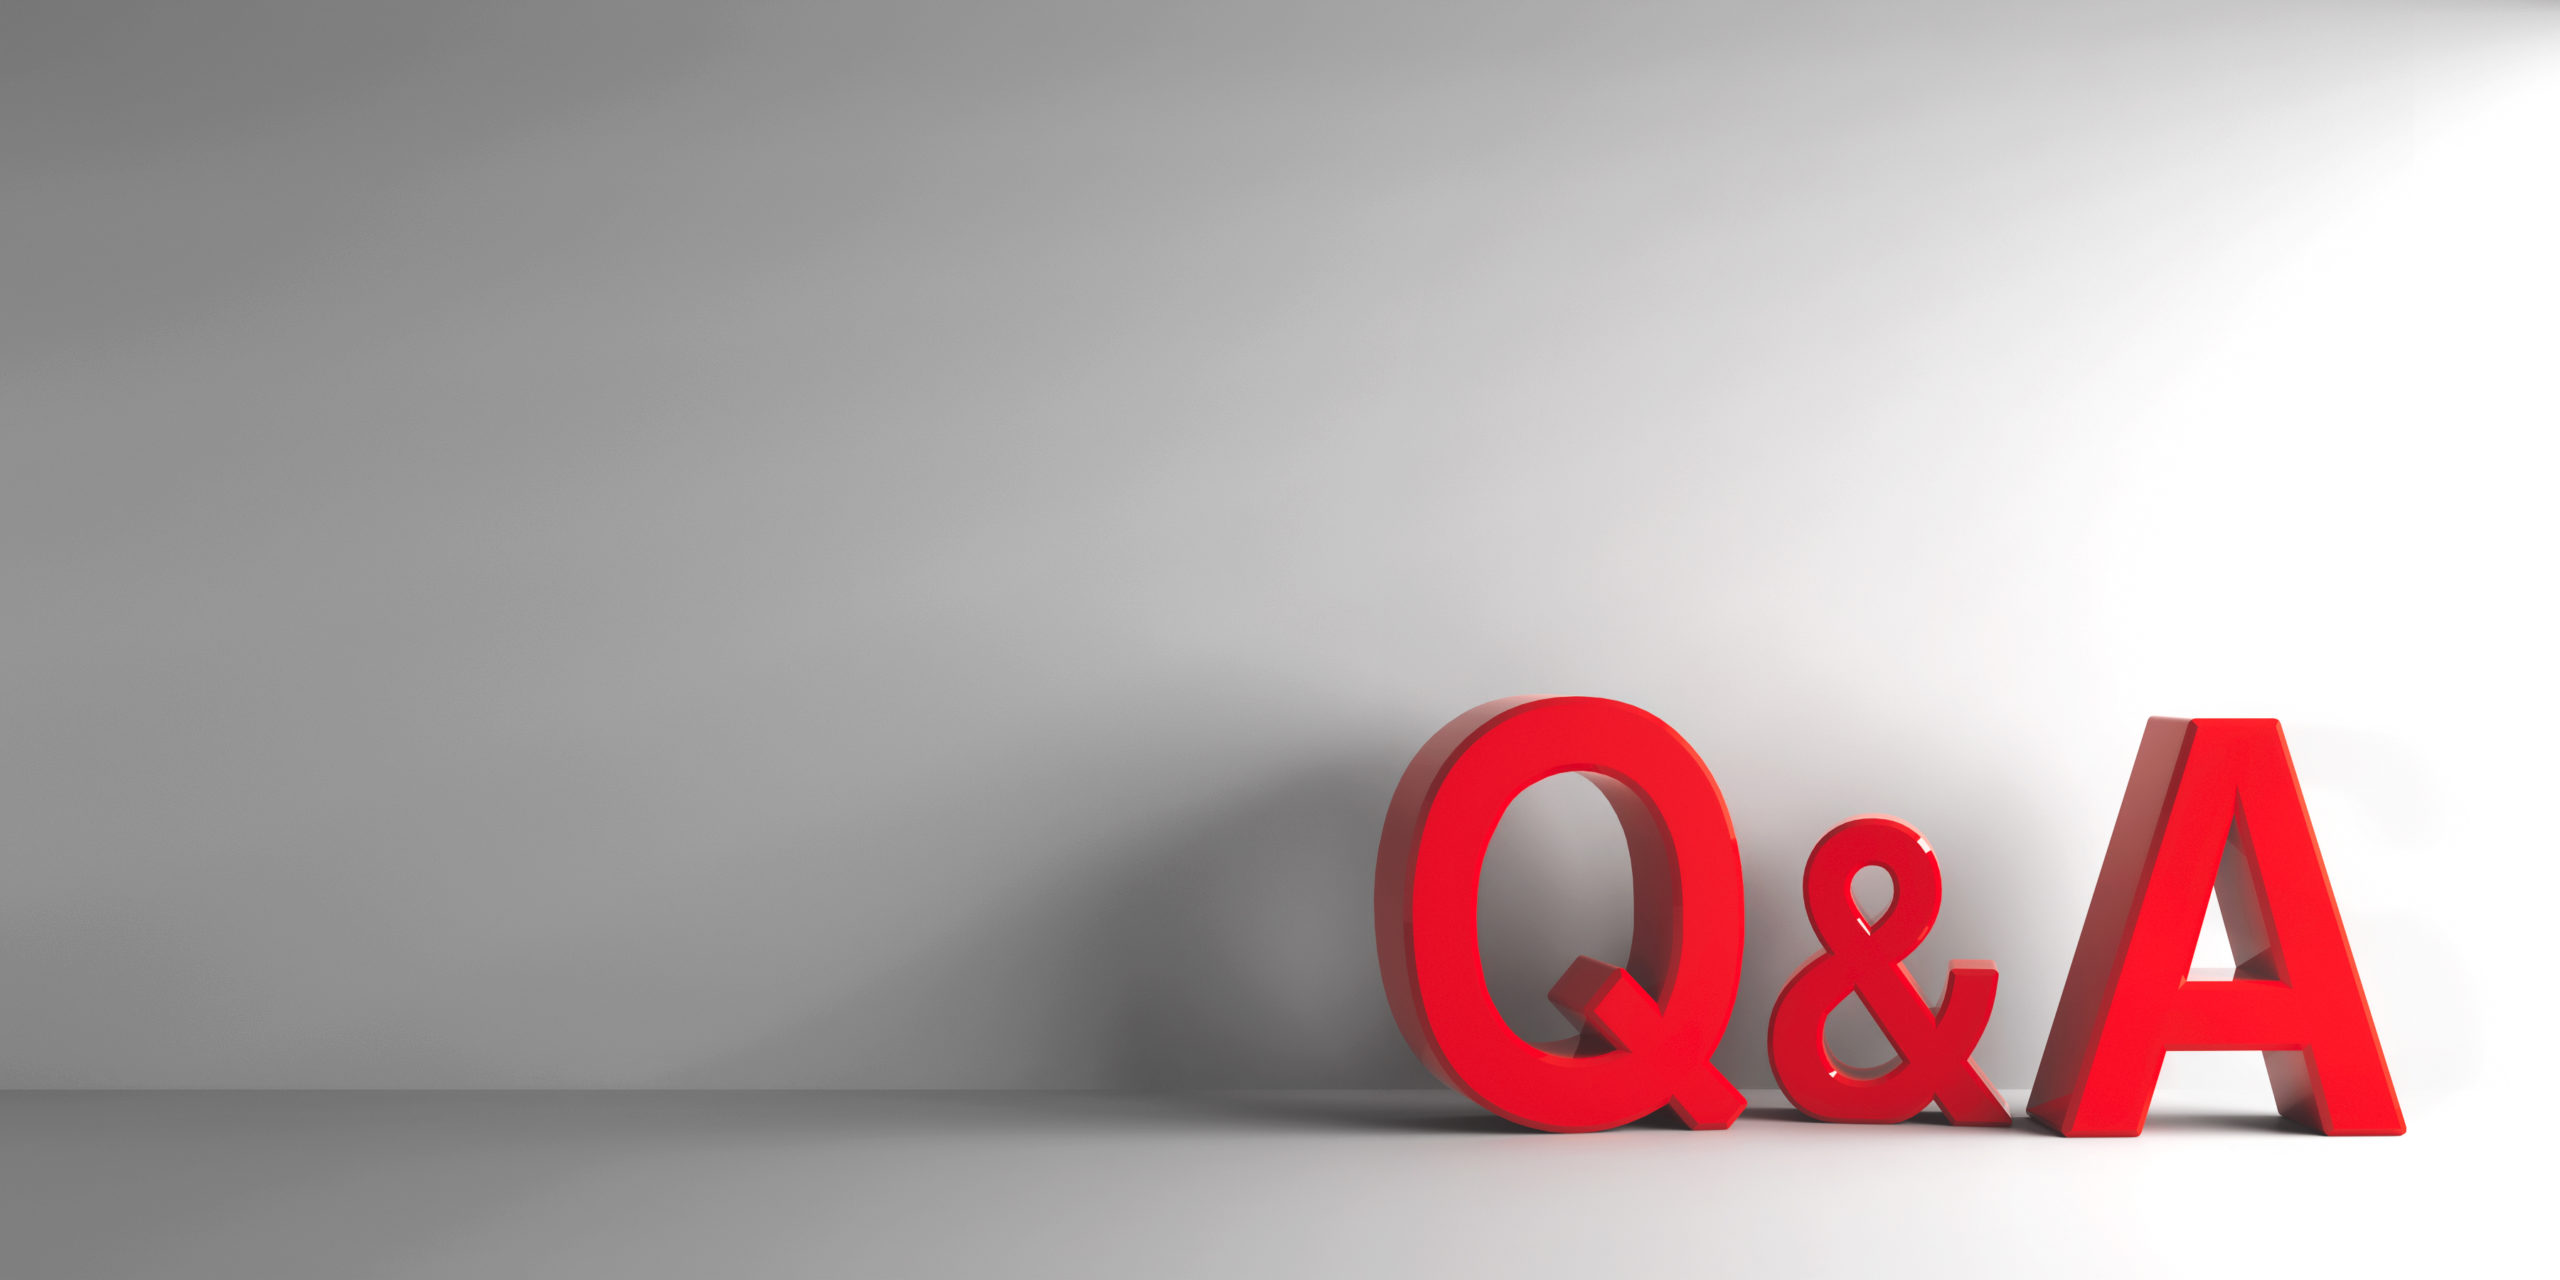 Q&A 3d letters painted in red